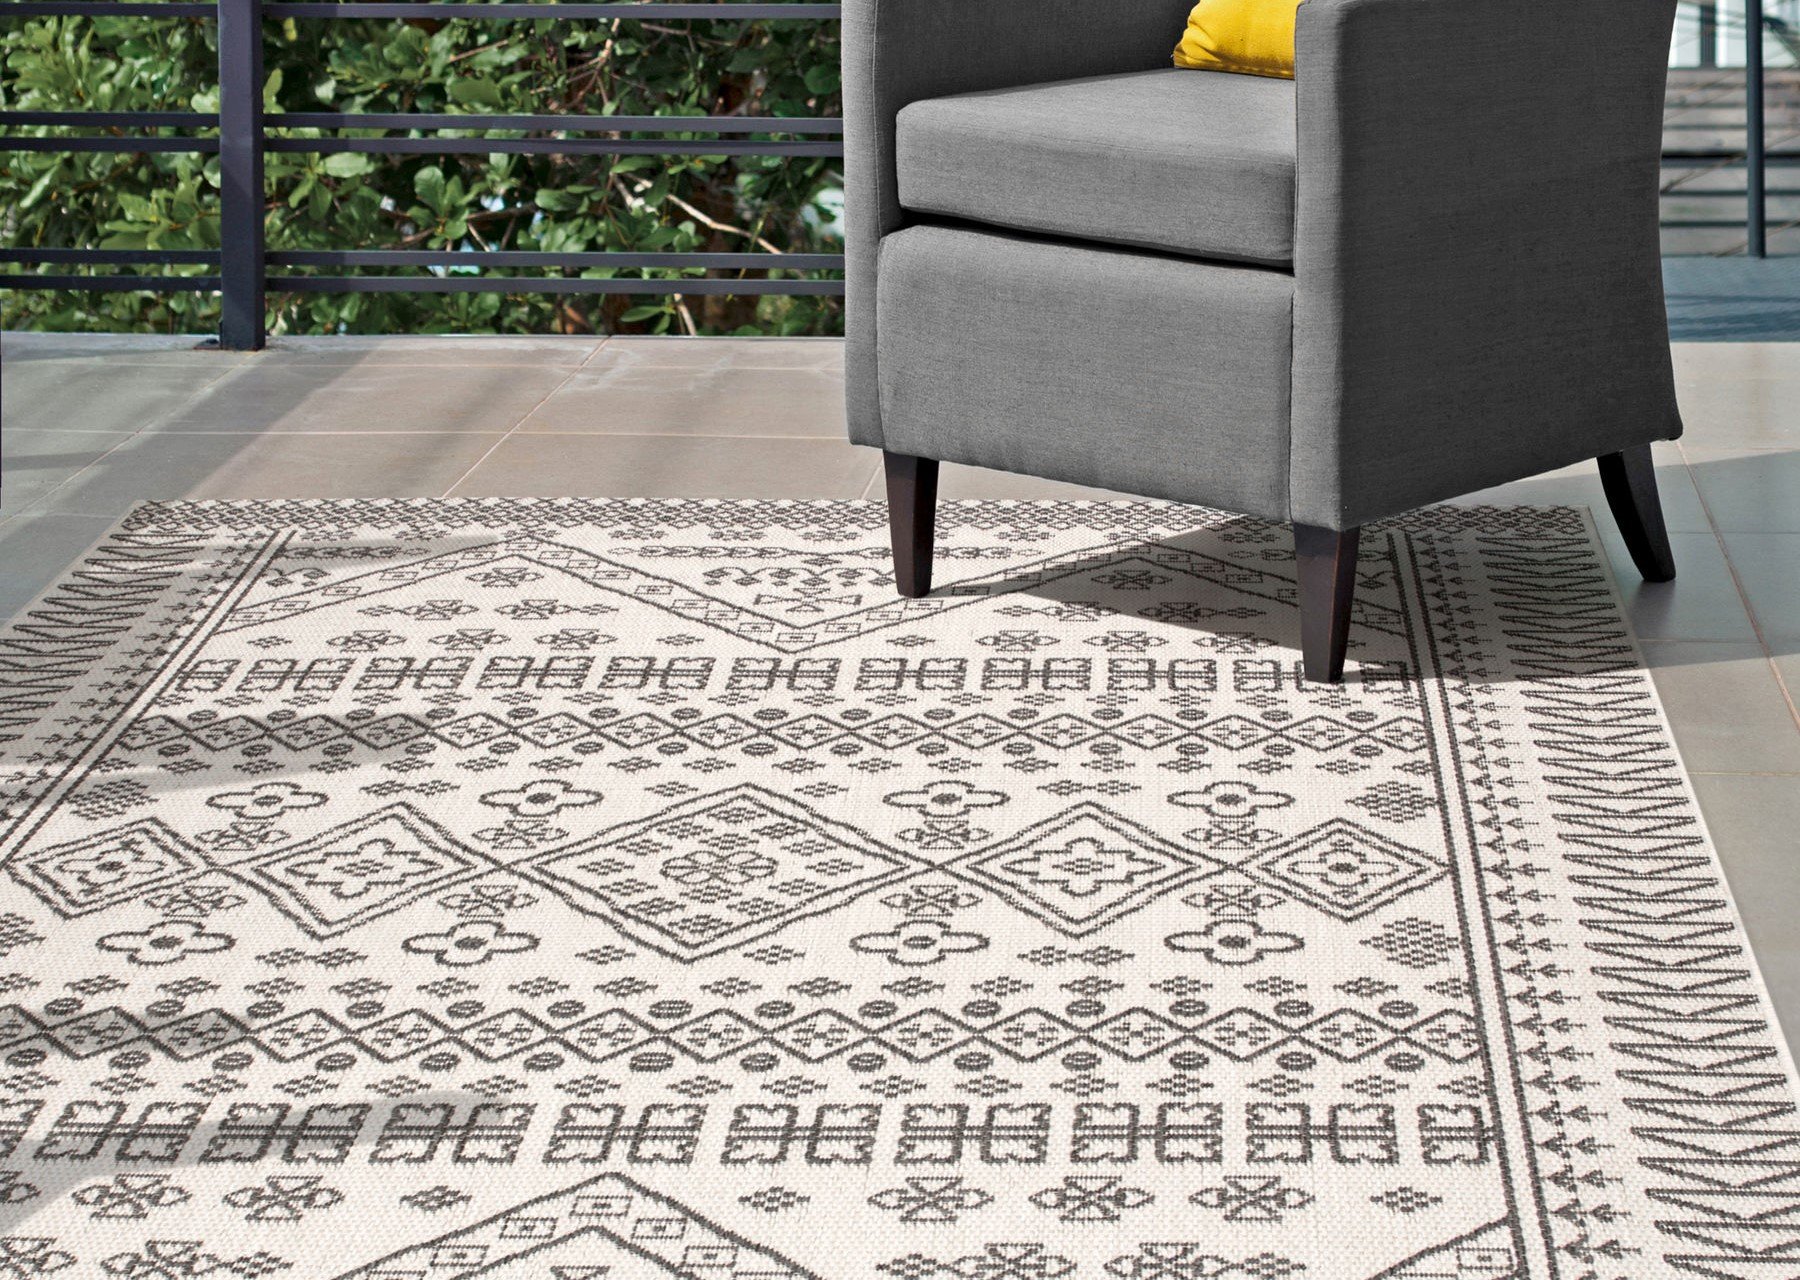 https://imagedelivery.net/ExKHvoWzpvFxpqockAGXOw/images/blog/2020/04/Kandace-Outdoor-Rug-from-Dawn-by-NuLoom.jpg/fit=crop,width=1800